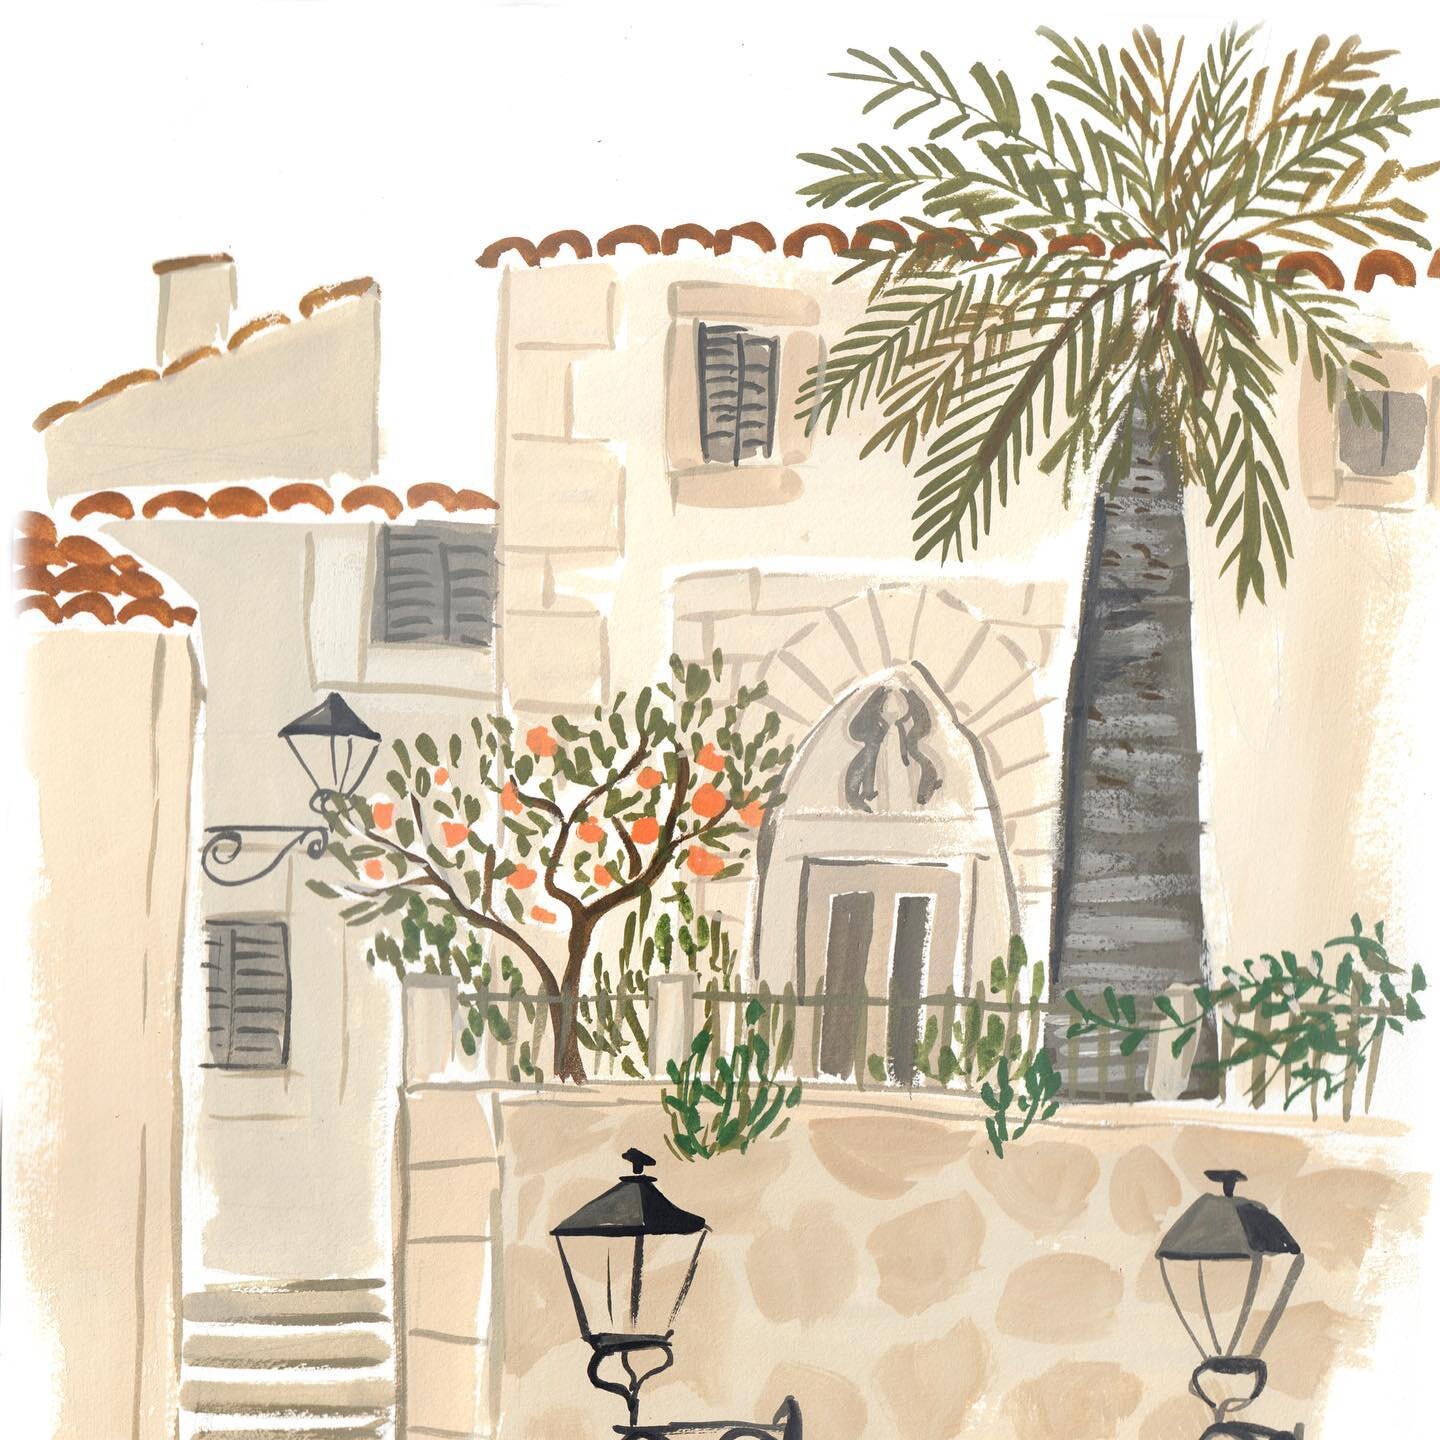 I just wanted to share a little update that there are only a few spaces left for my sketchbooking retreat in Spain next spring!

We will be focusing on painting and drawing in our sketchbooks using a mixed media approach with watercolour, gouache, co